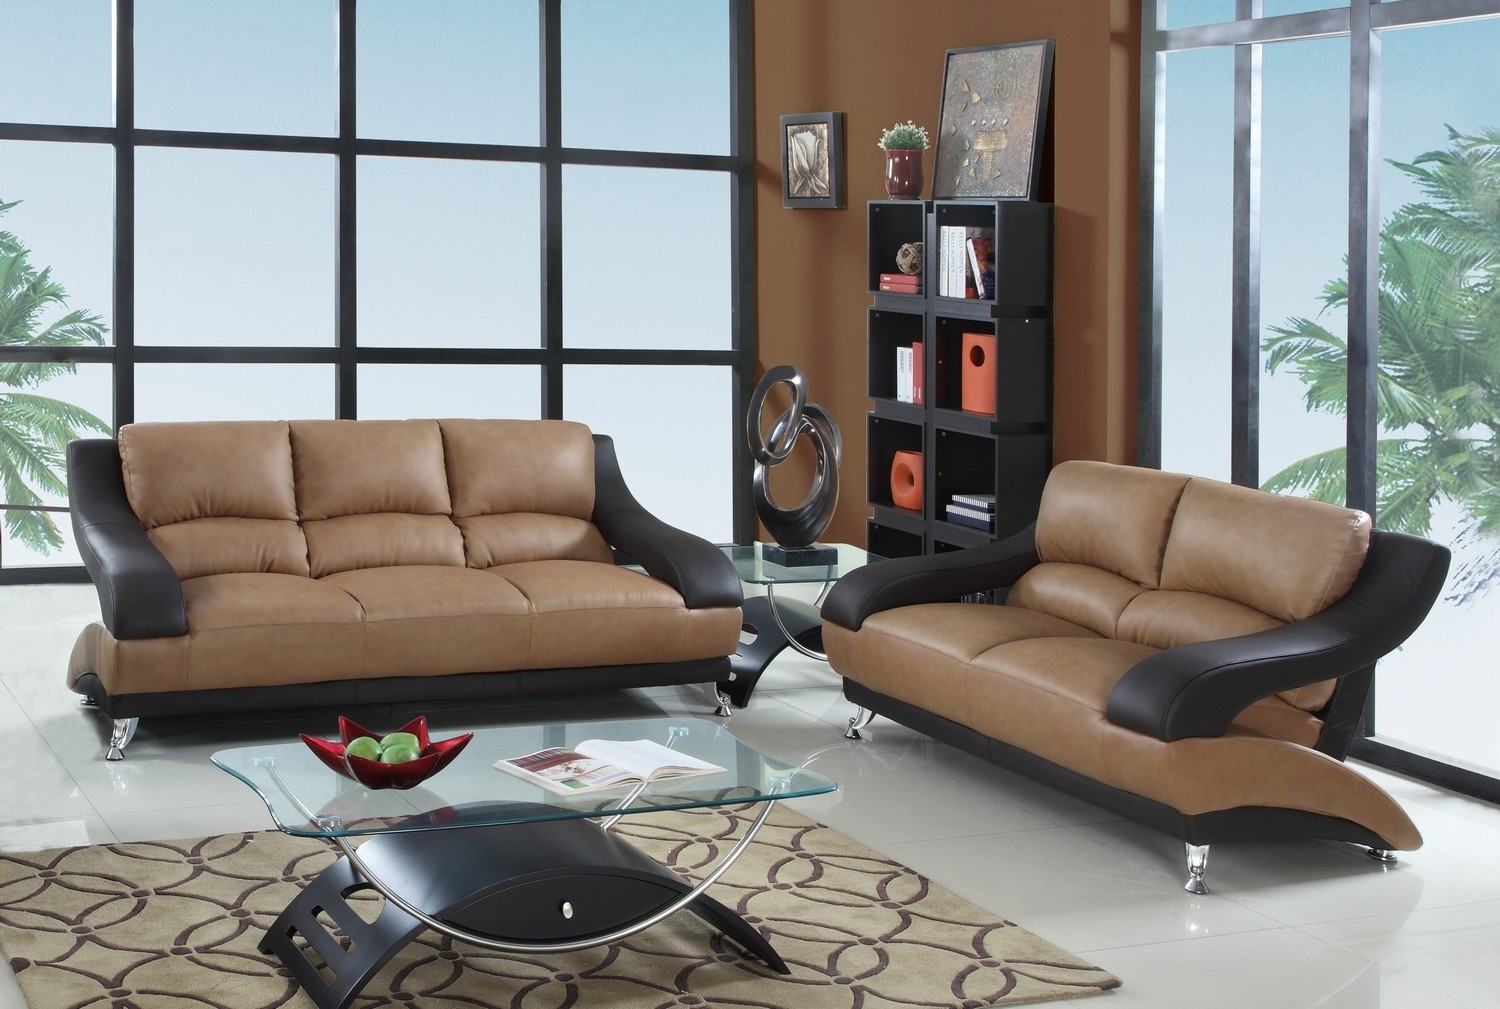 62 X 37 X 43 Modern Two Tone Leather Sofa And Loveseat